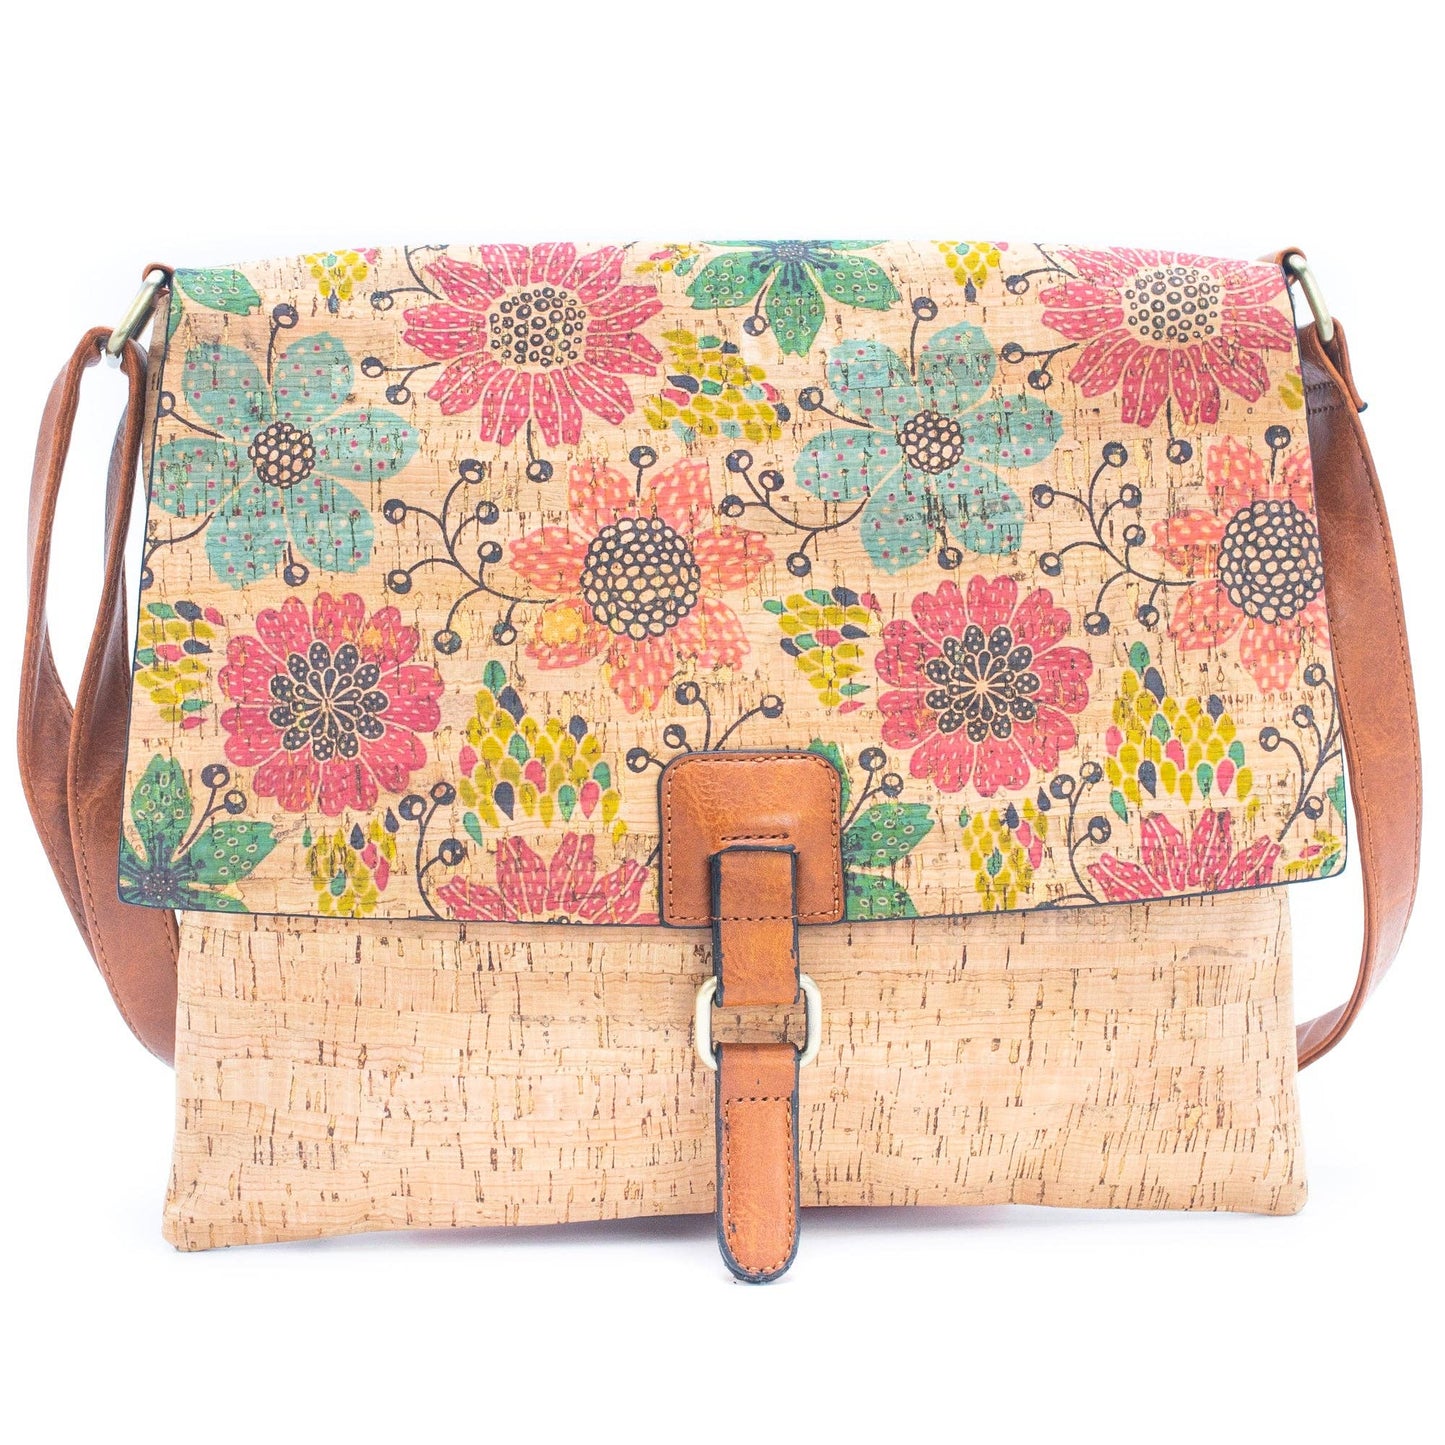 Cork Crossbody Bag with Mosaic and Floral Prints BAGD-464-8